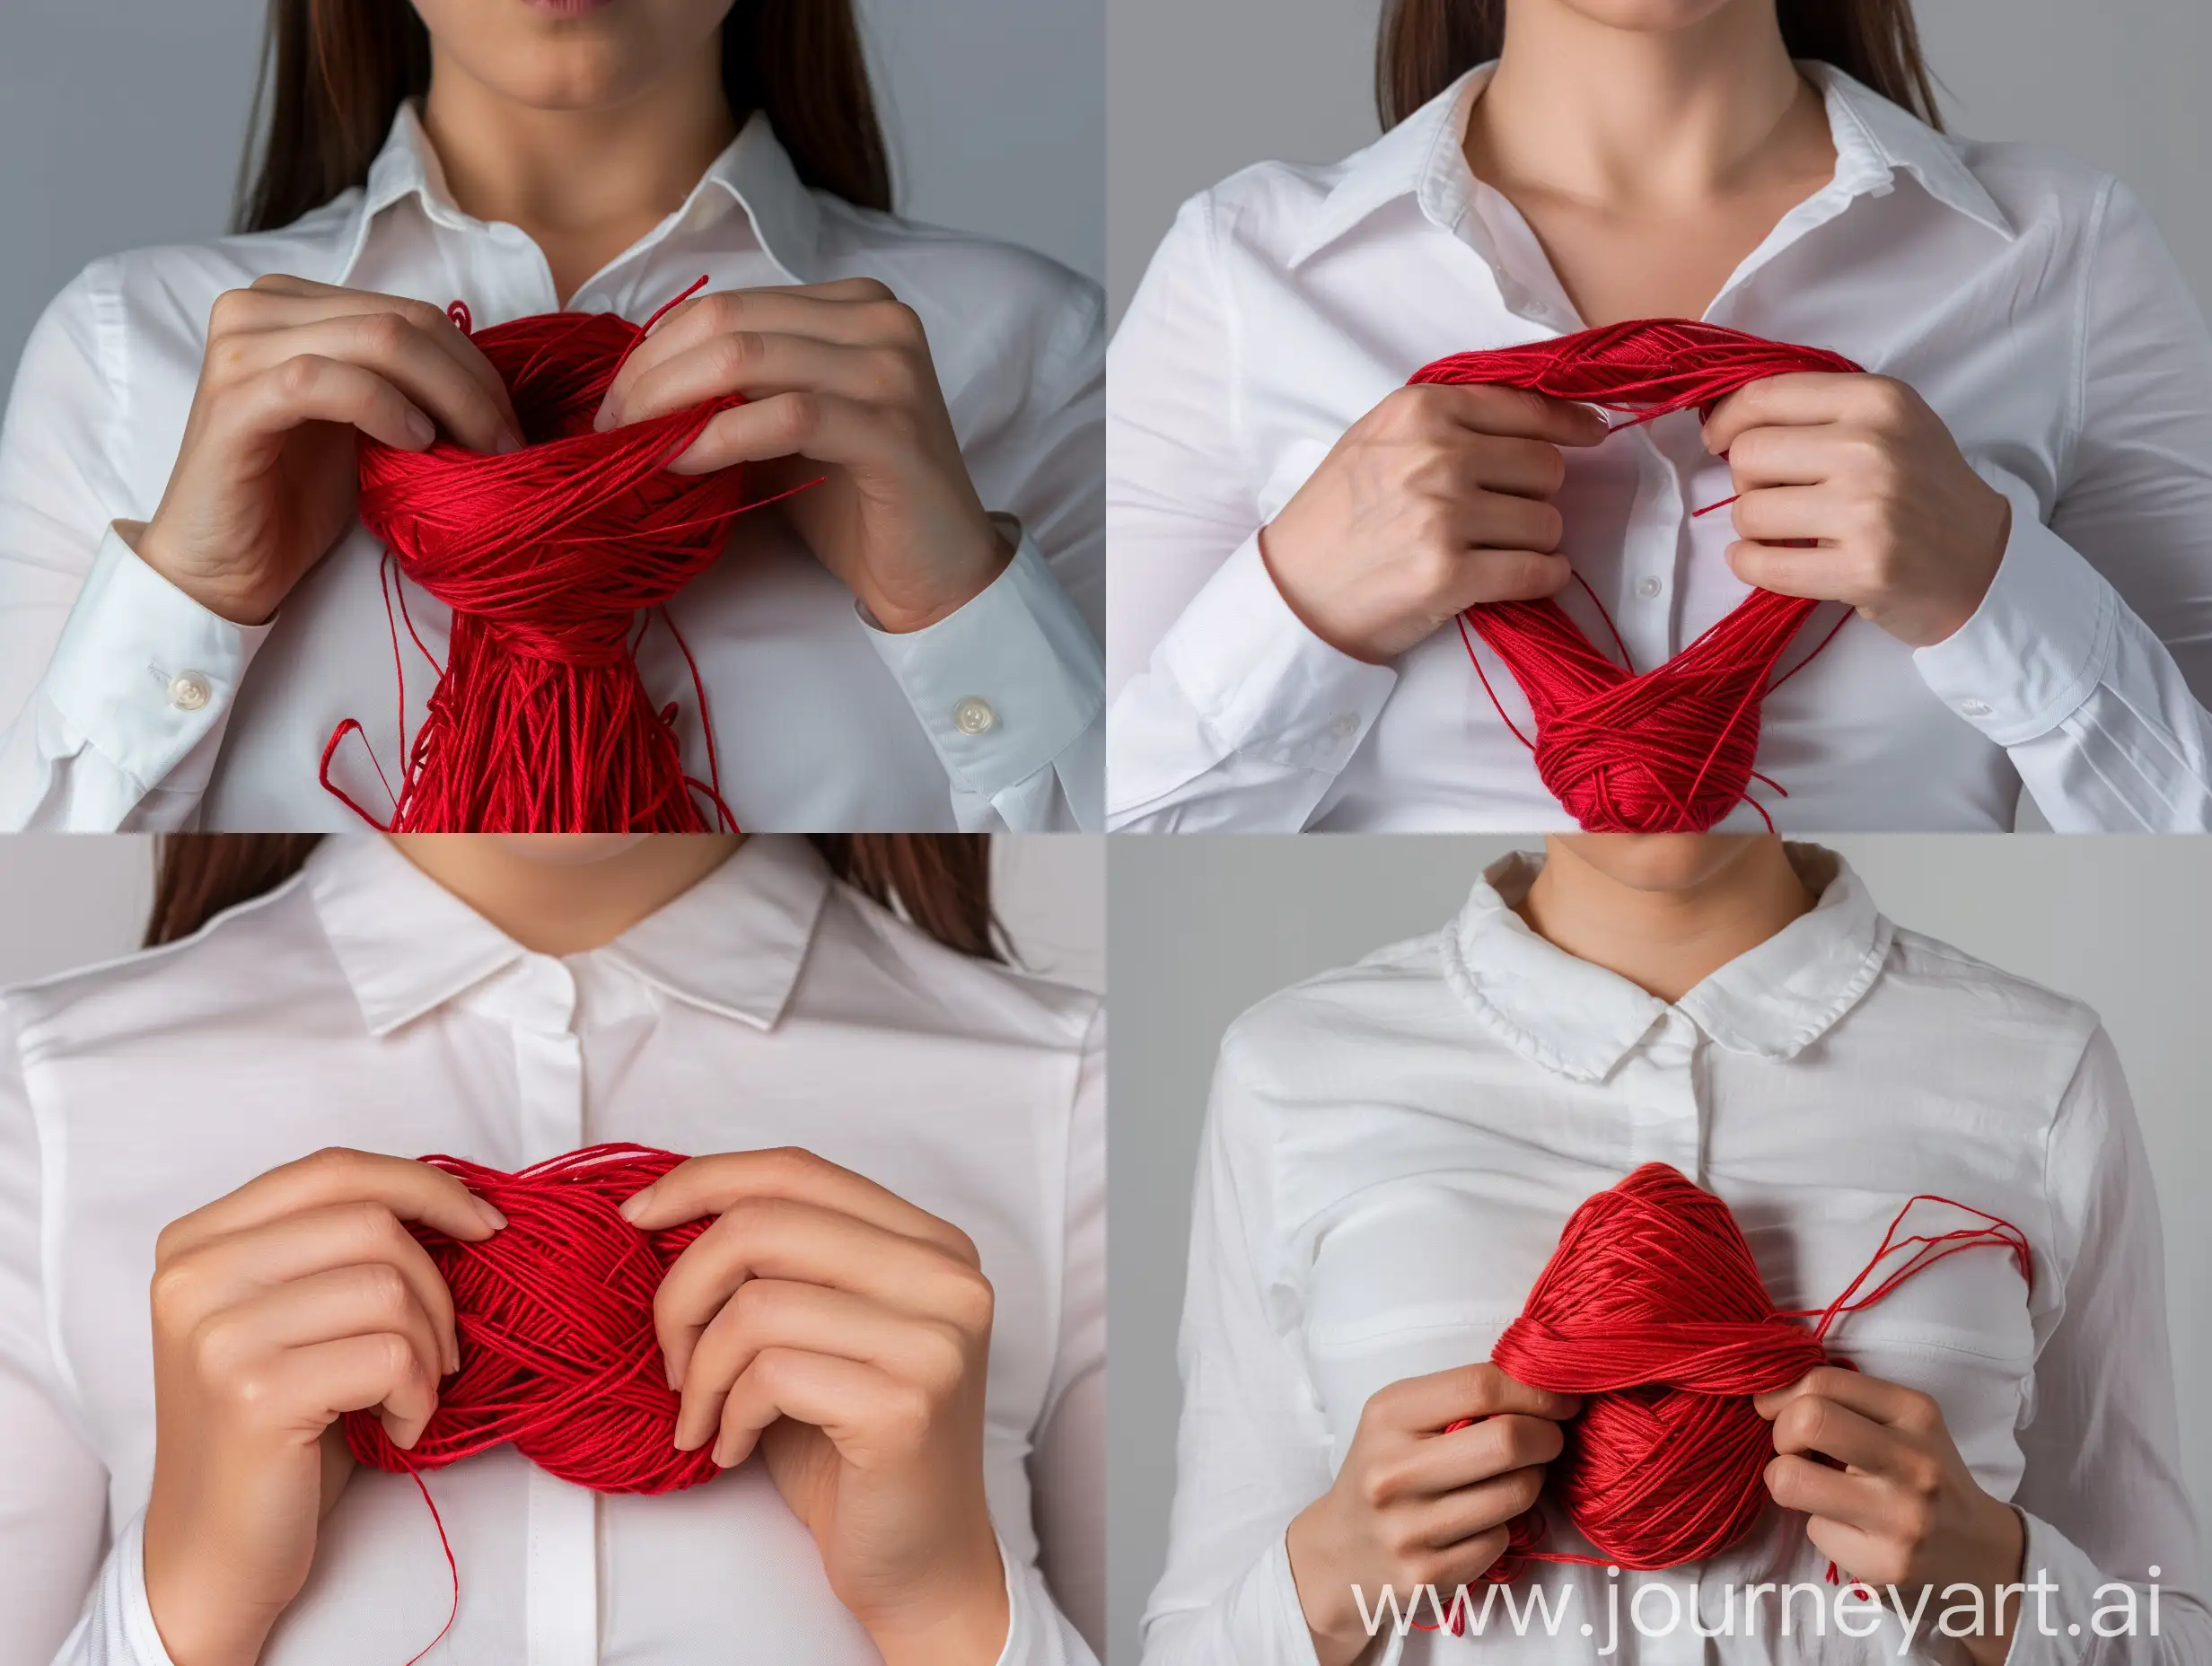 Graceful-Woman-Holding-Red-Skeins-of-Thread-in-Simple-White-Shirt